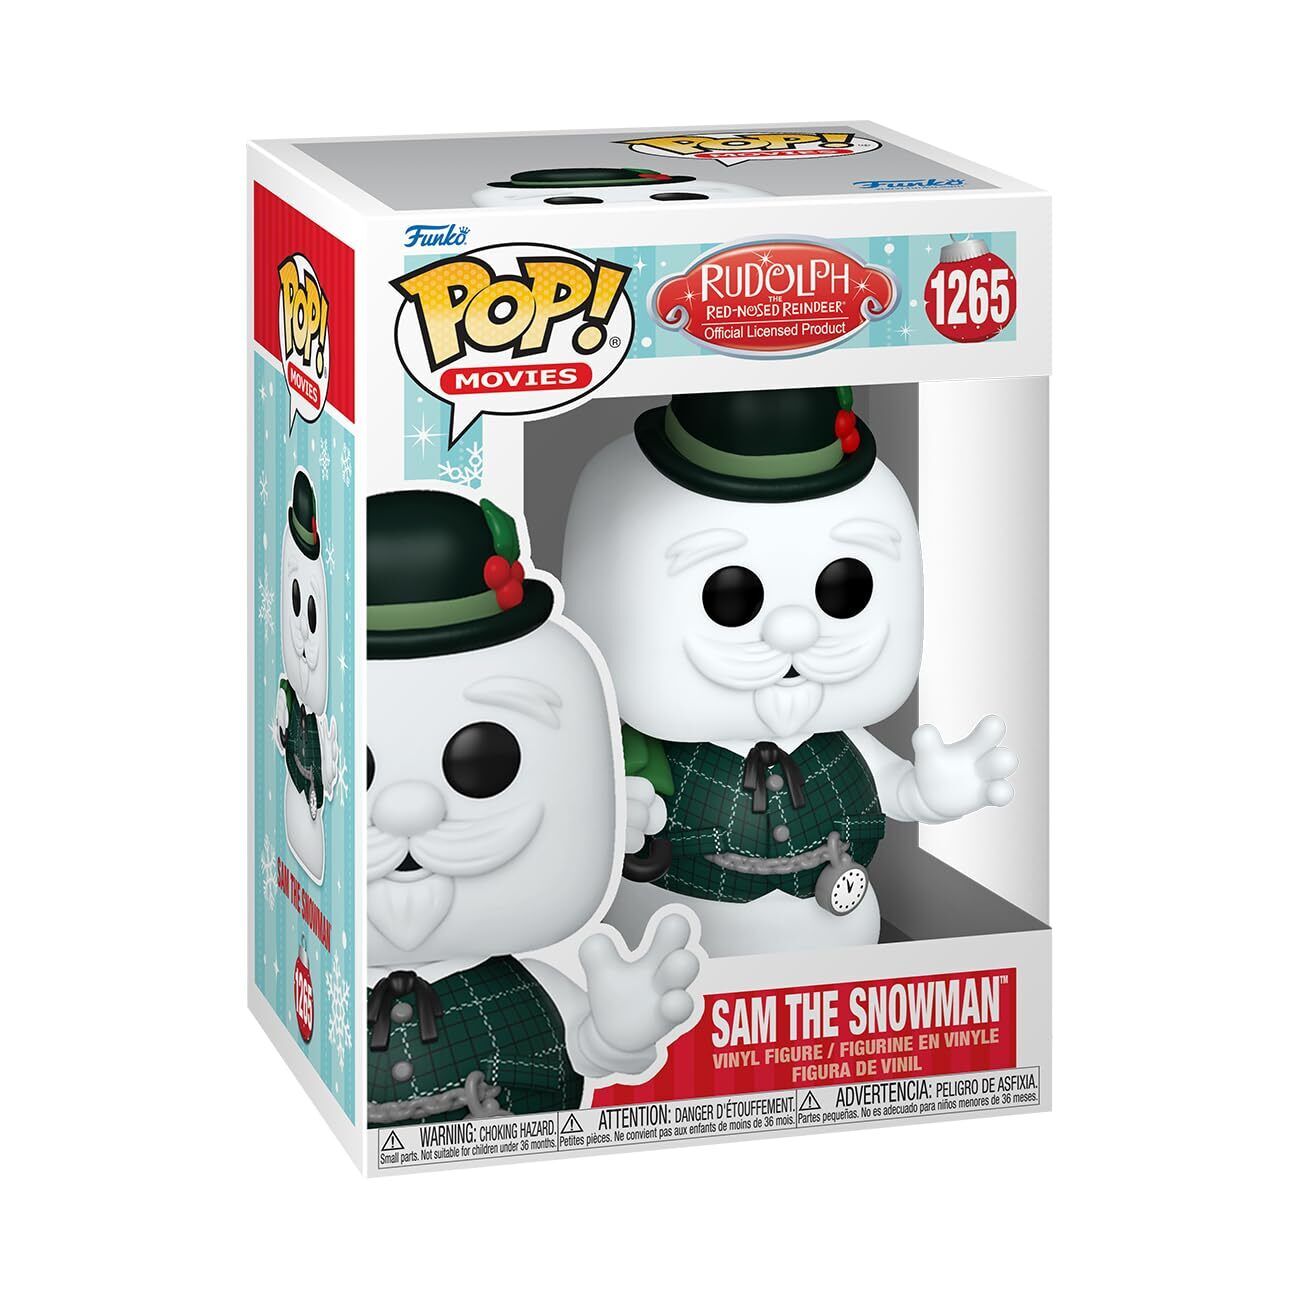 Funko POP Movies: Rudolph - Sam the Snowman - Rudolph the Red-Nosed Reindeer - 